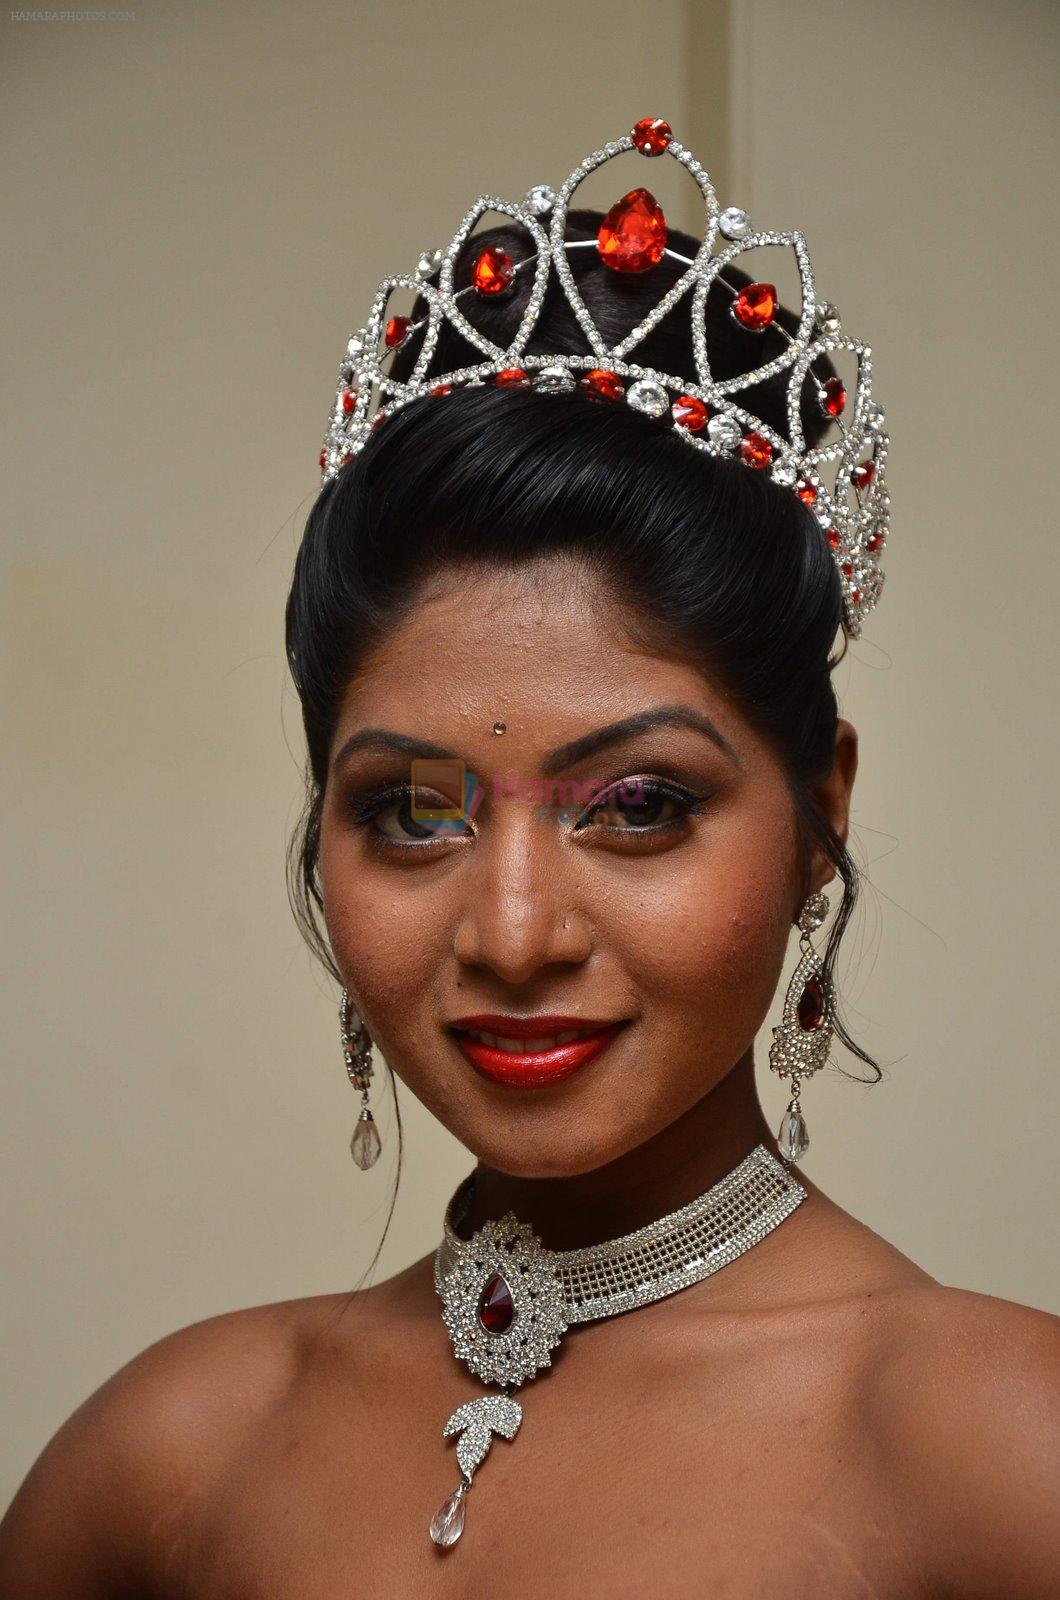 Shital Upare, second runner-up Miss Heritage International in Kohinoor on 9th Dec 2014